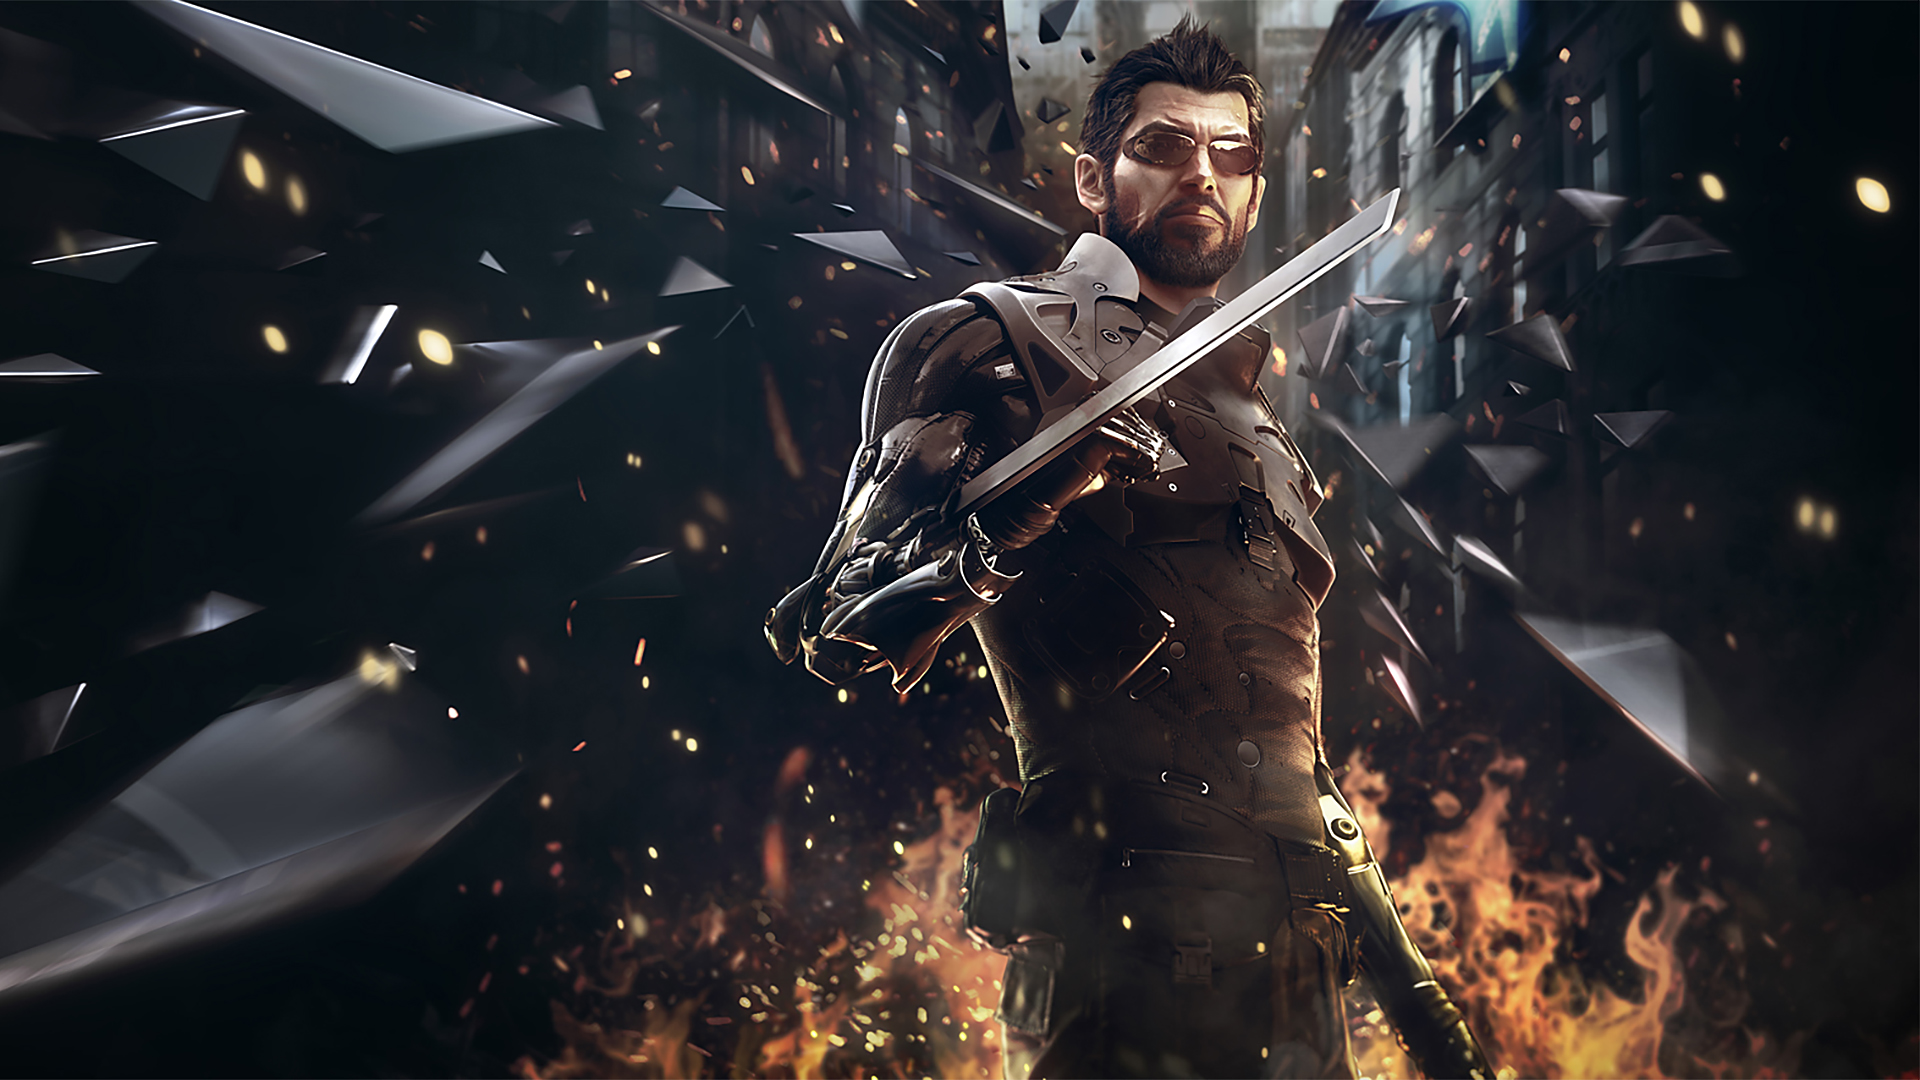 Eidos Montreal has reportedly launched production of a new Deus Ex game